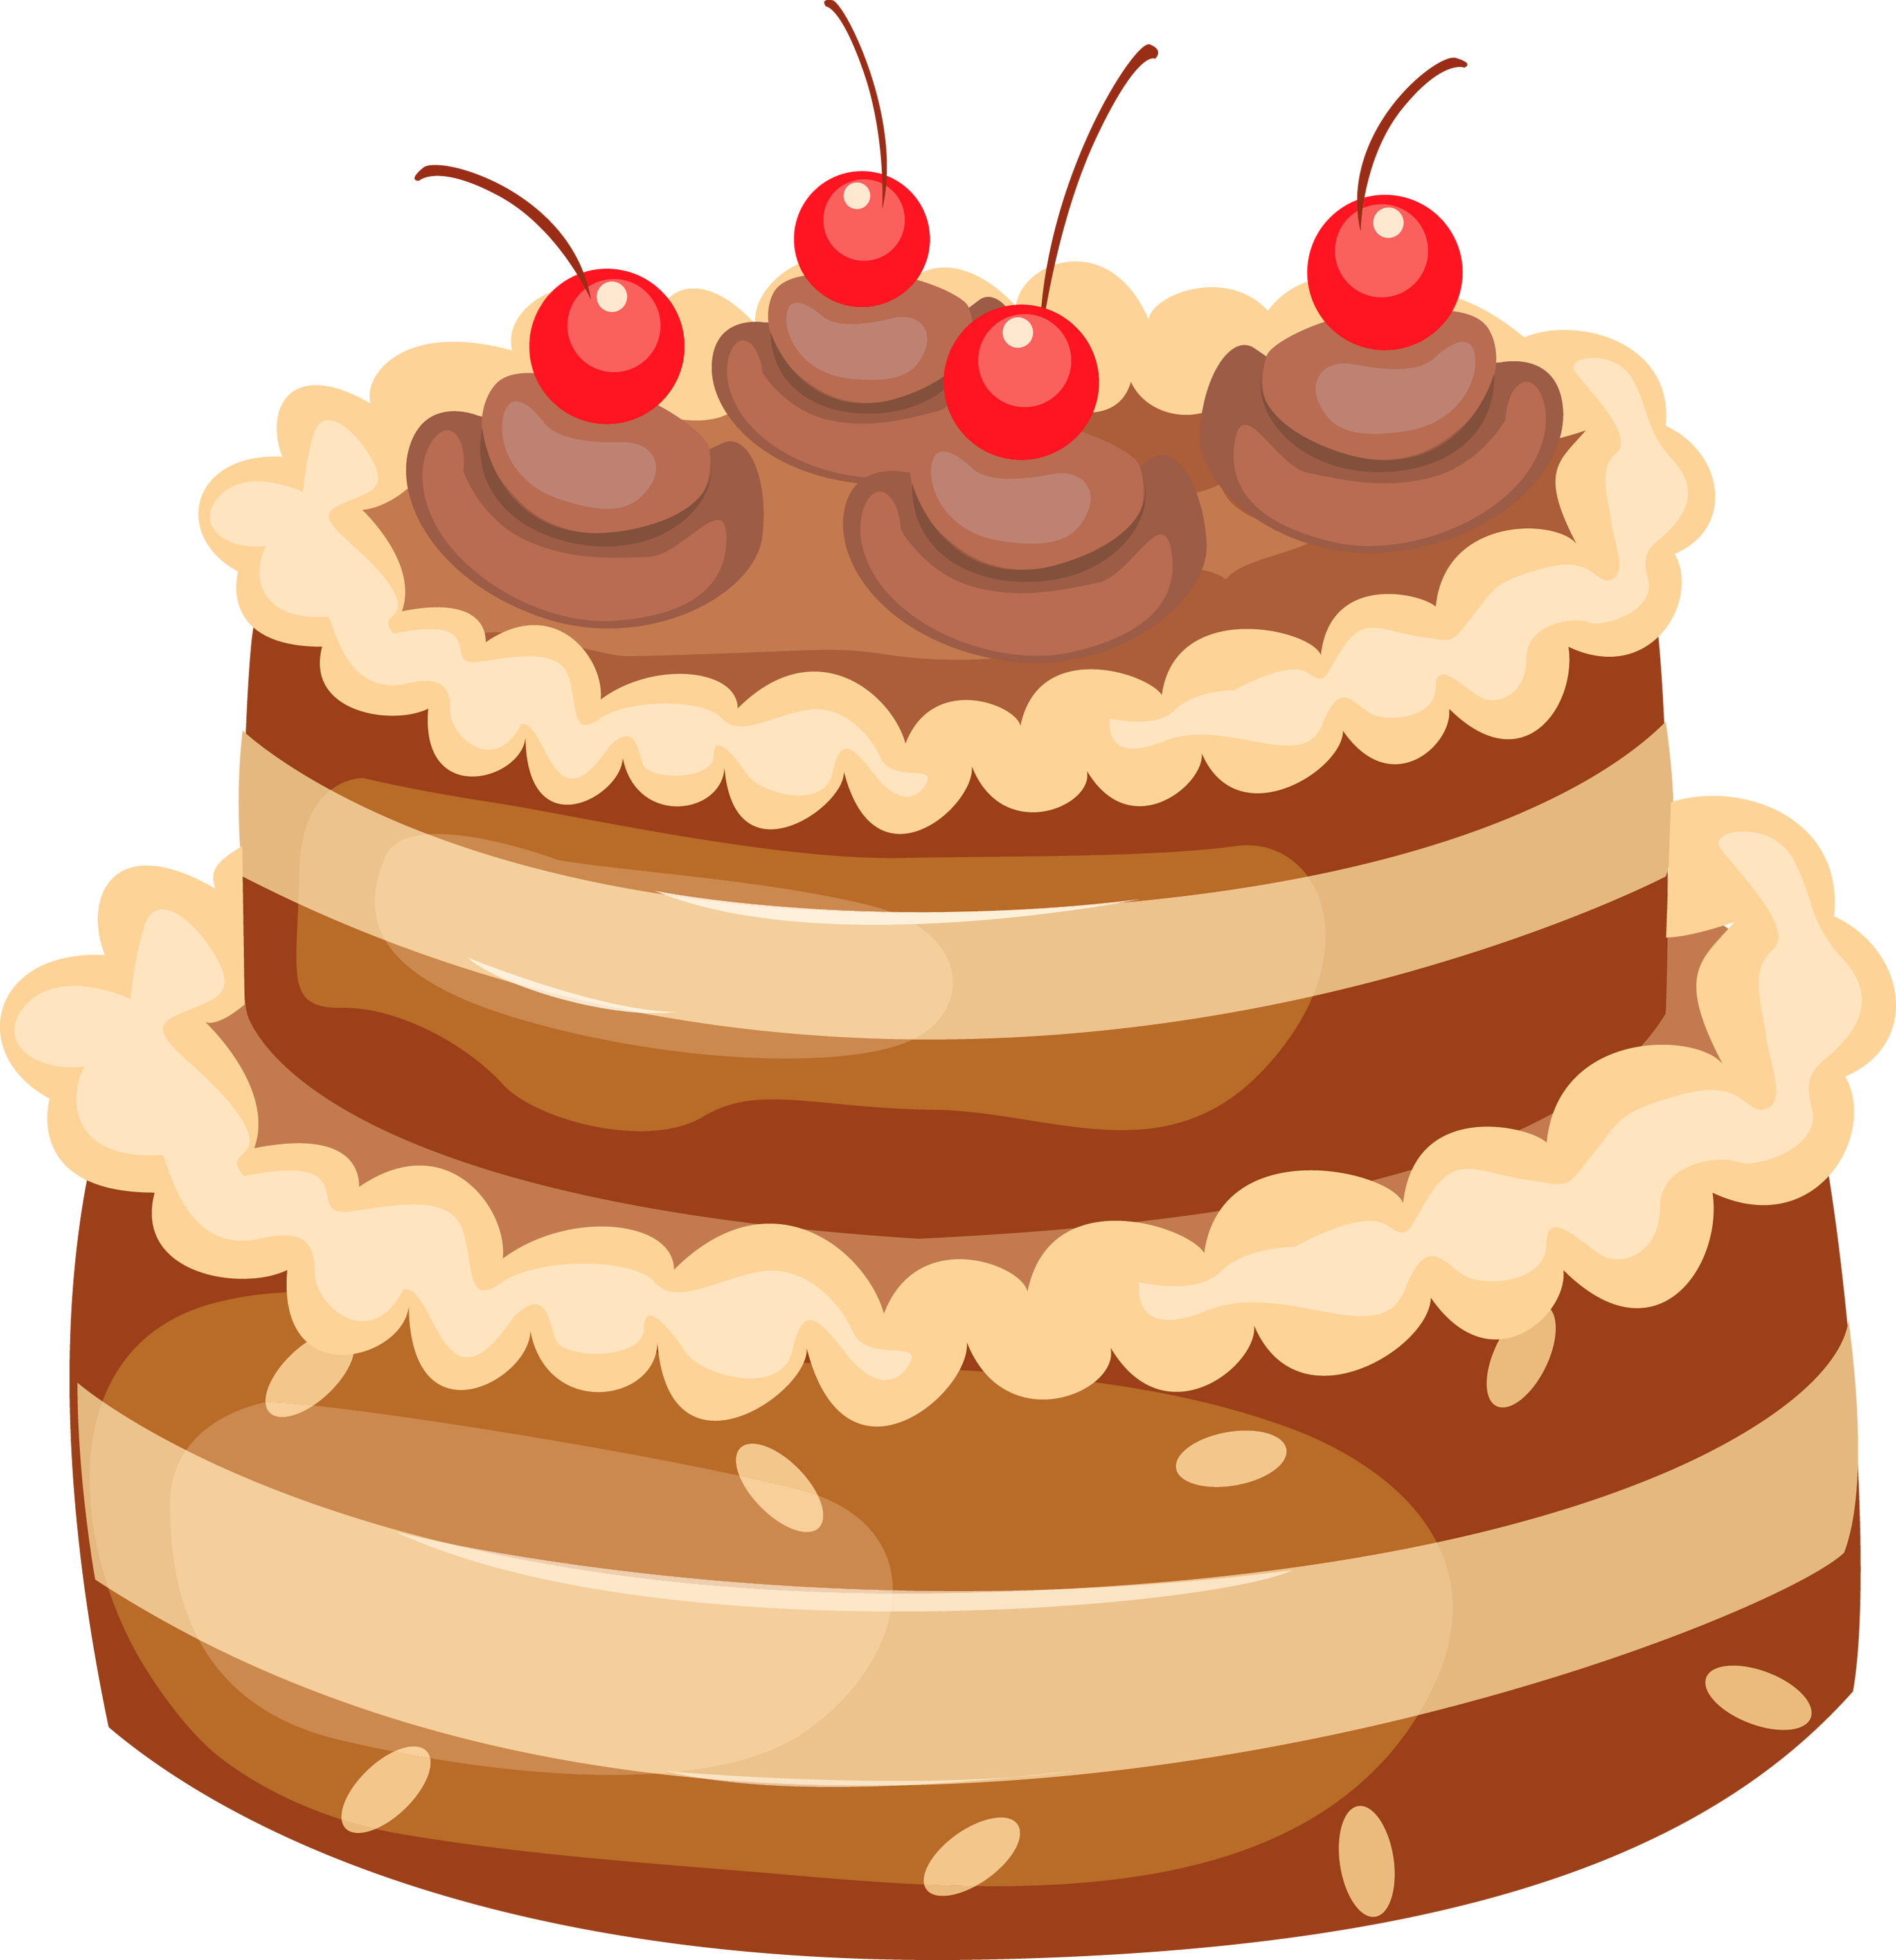 63 Cake PNG images are available for free download-